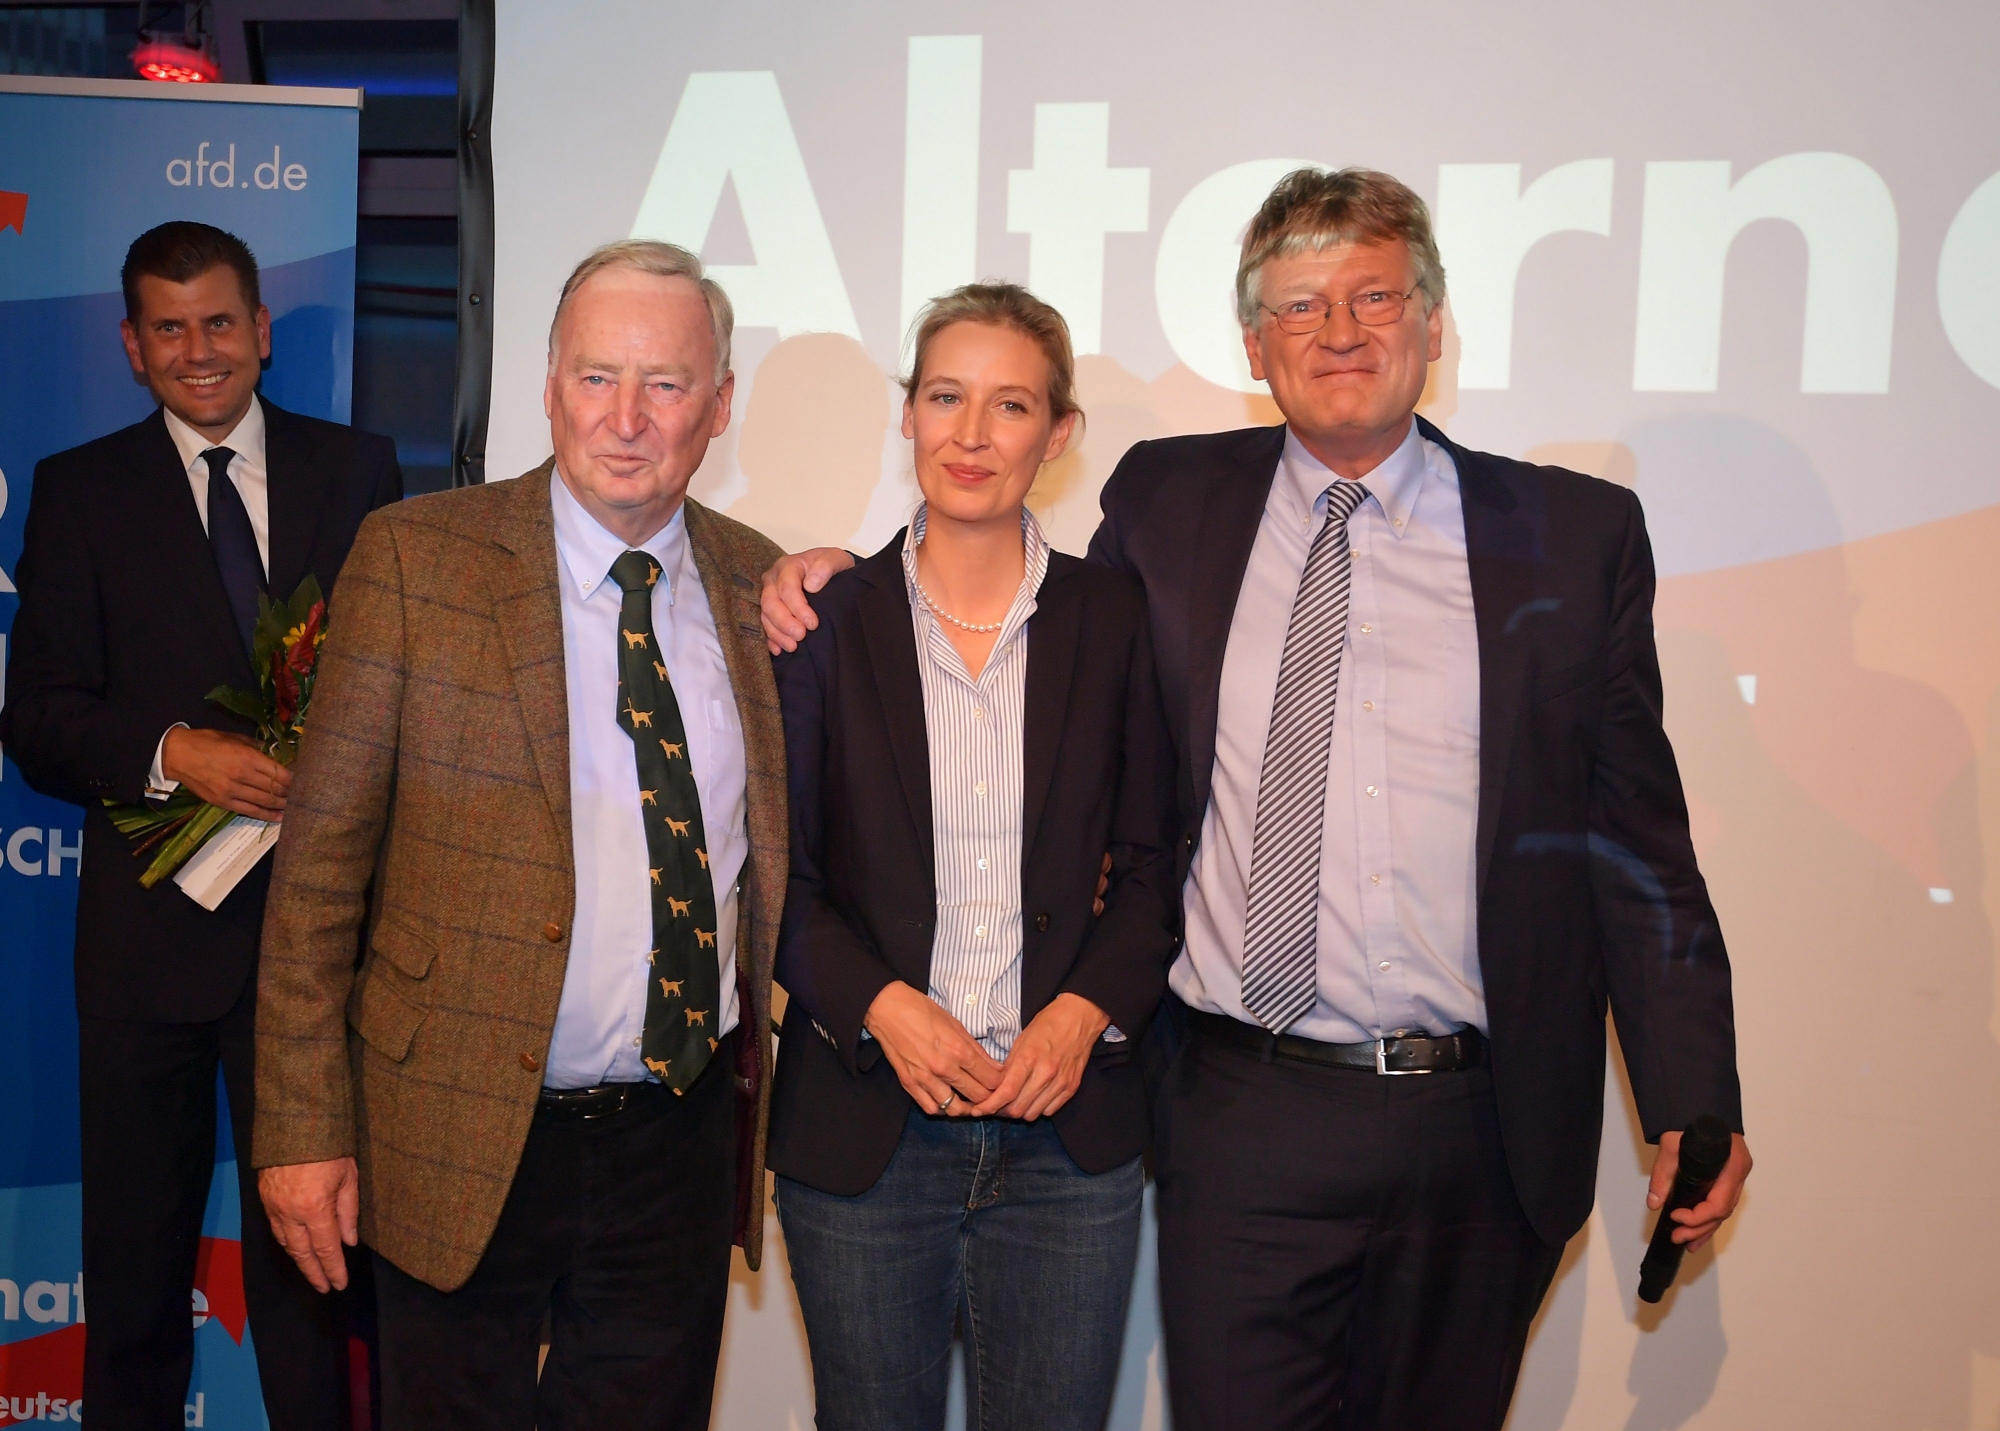 epa06224736 (L-R) Co-top candidates Alexander Gauland and Alice Weidel of the German right-wing populist party 'Alternative for Germany' (AfD) and AfD federal co-chairman Joerg Meuthen pose at a night club where right-wing populist party AfD holds their election event in Berlin, Germany, 24 September 2017. According to federal election commissioner more than 61 million people were eligible to vote in the elections for a new federal parliament, the Bundestag, in Germany.  EPA/CHRISTIAN BRUNA GERMANY ELECTIONS 2017